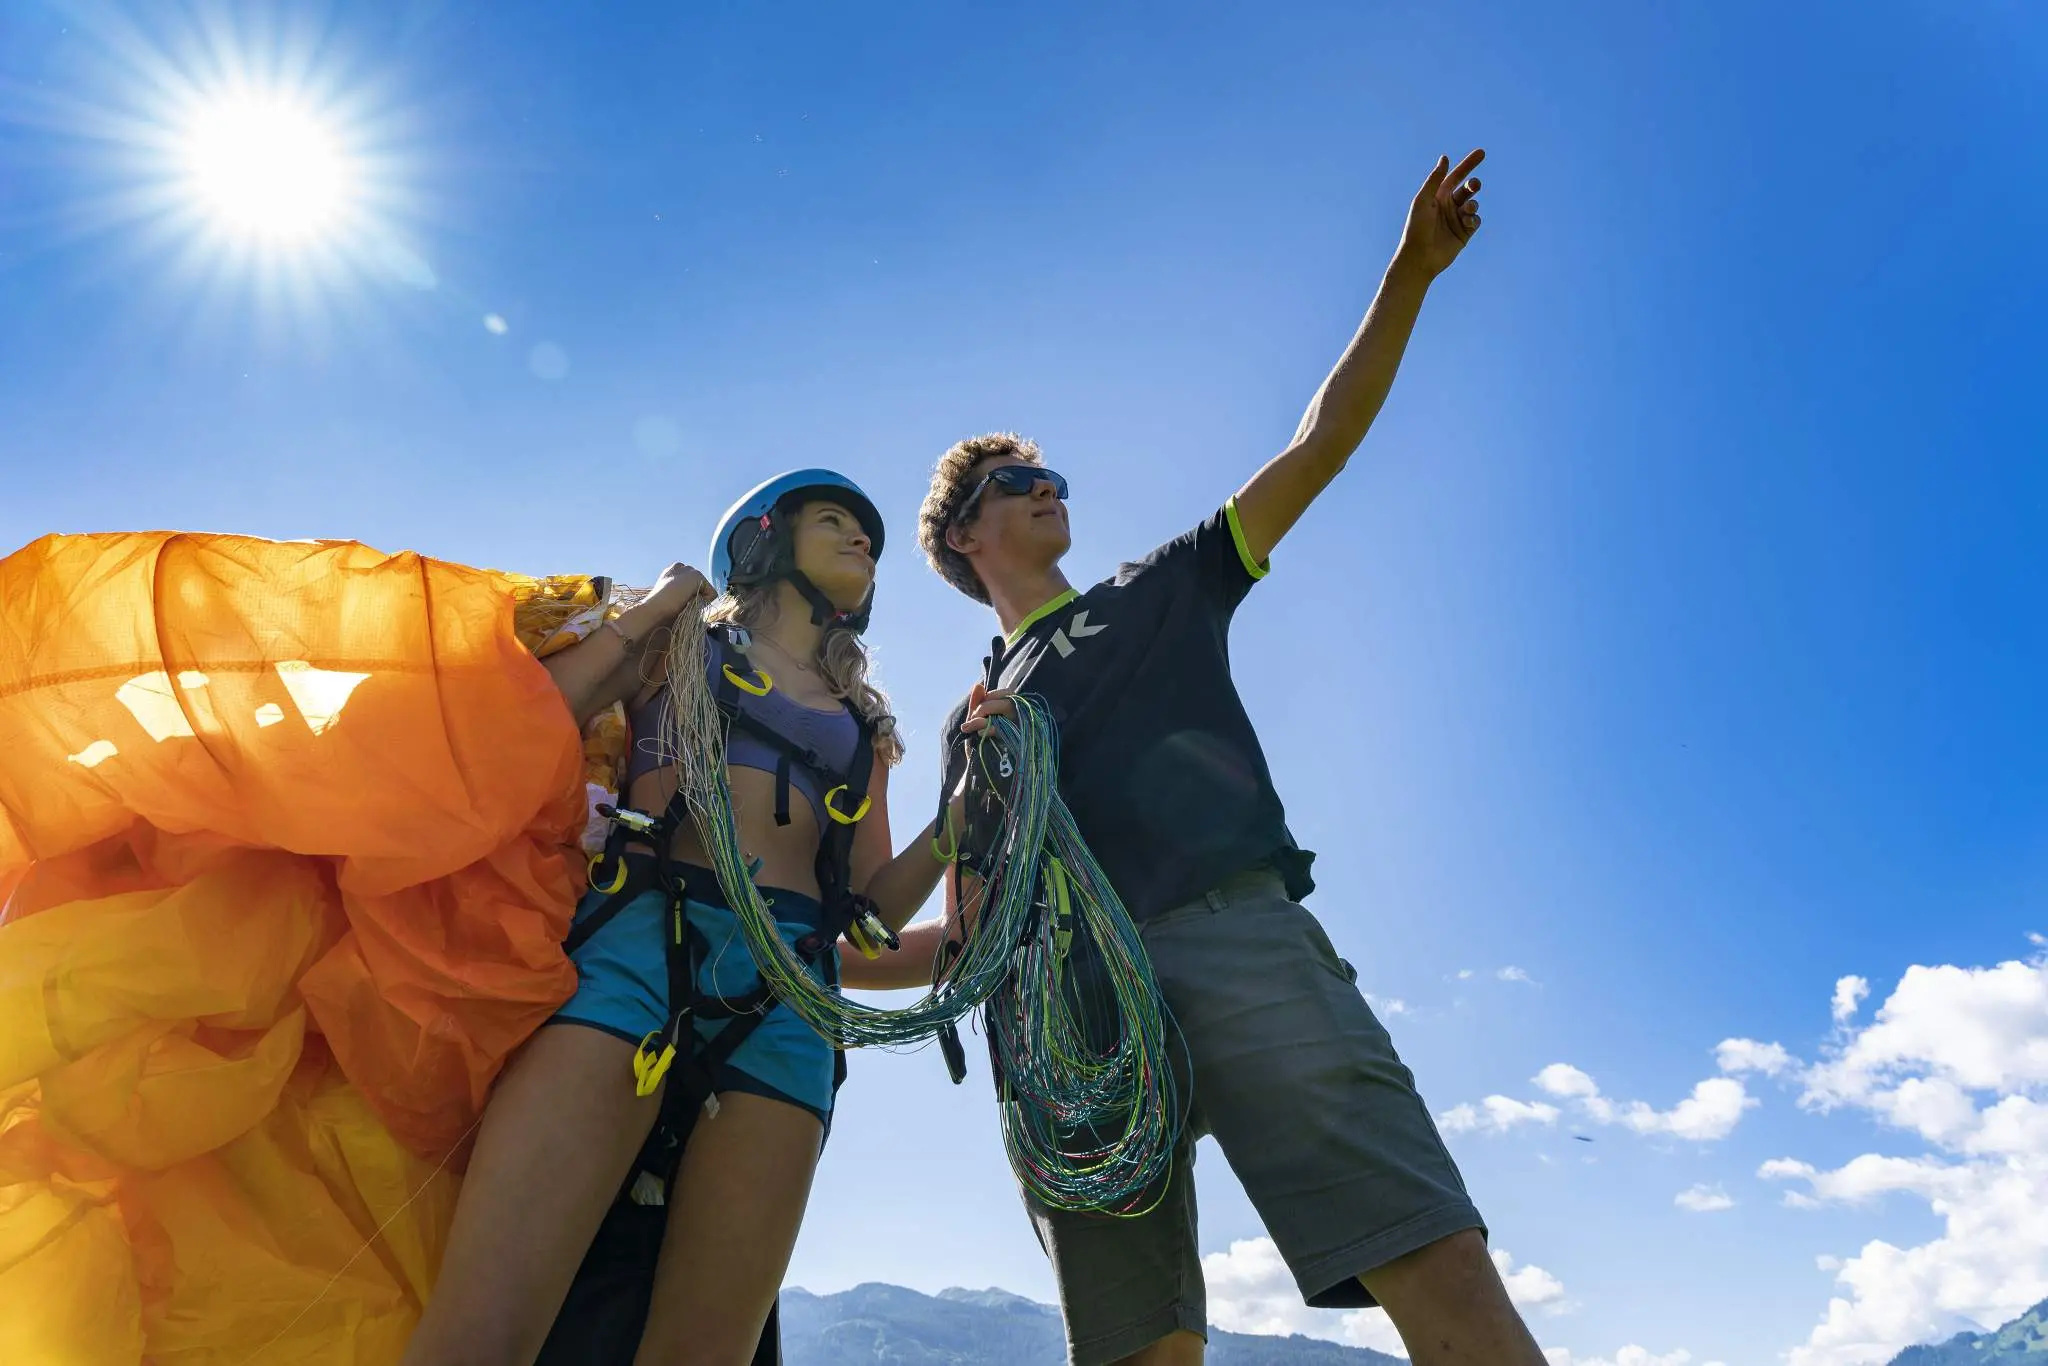 Paragliding, paragliding license training FAQ training A-certificate. Here you will find answers to frequently asked questions about paragliding license training.